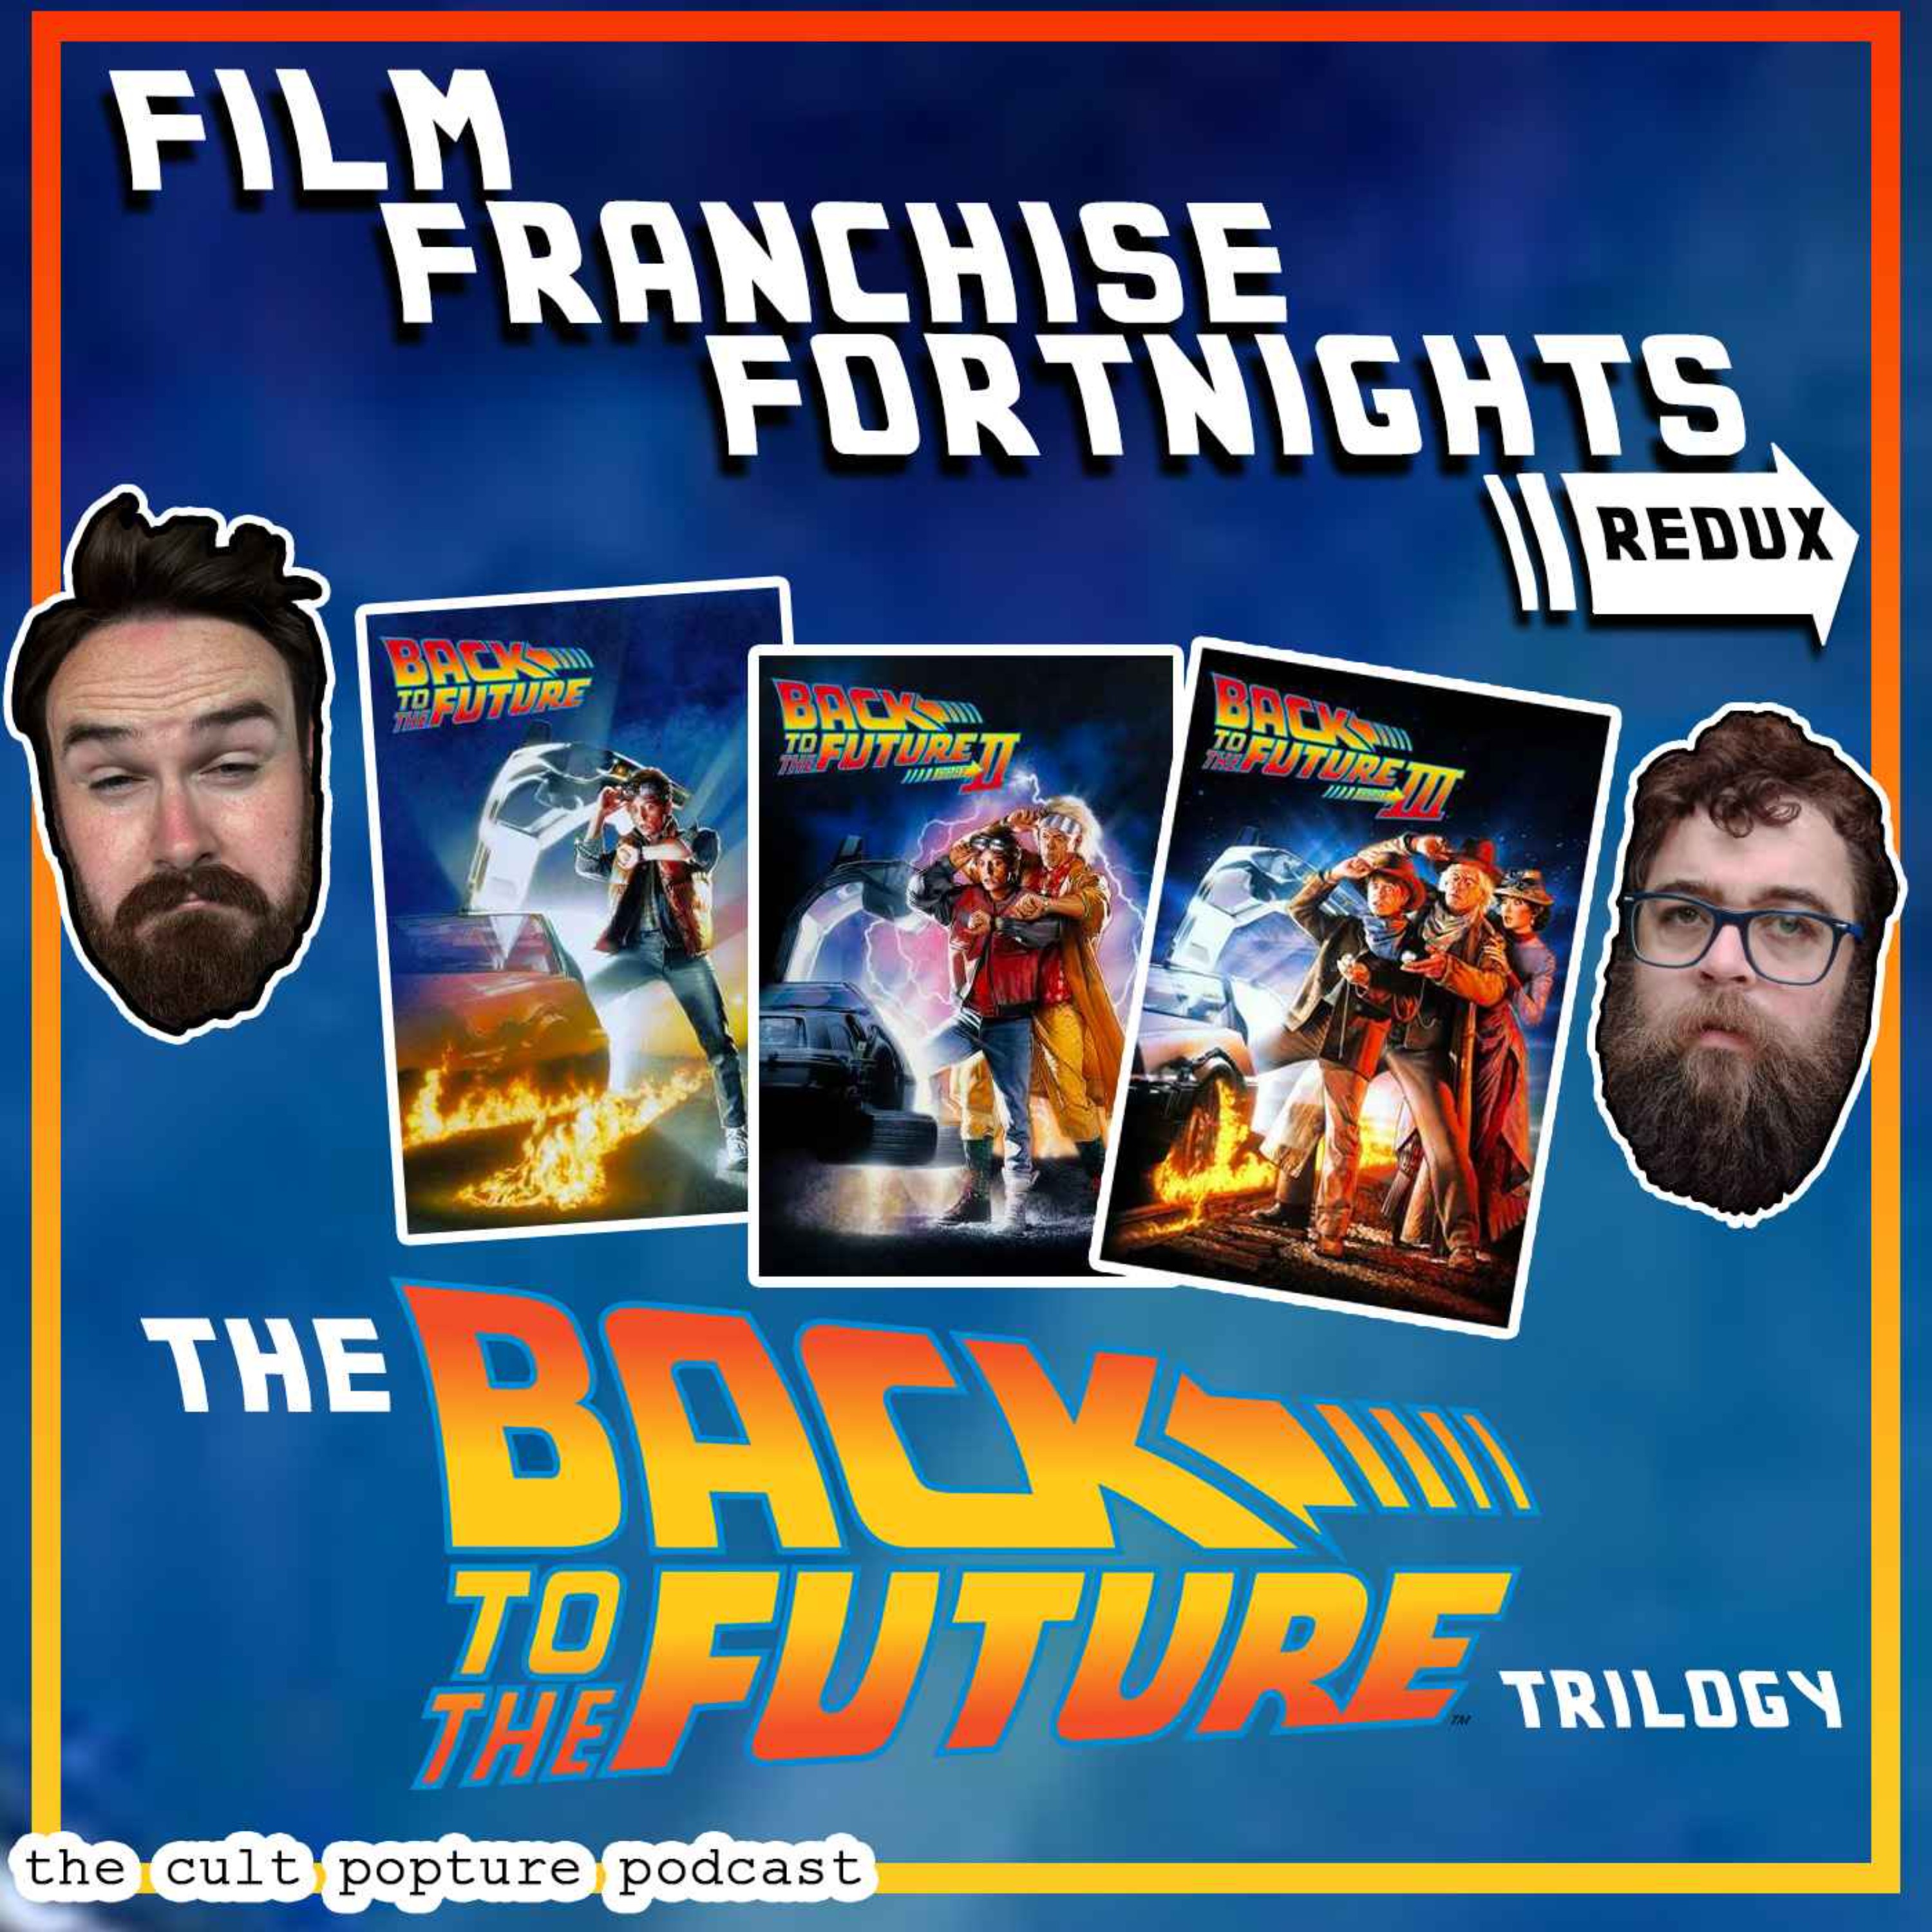 The ”Back to the Future” Trilogy | Film Franchise Fortnights Redux